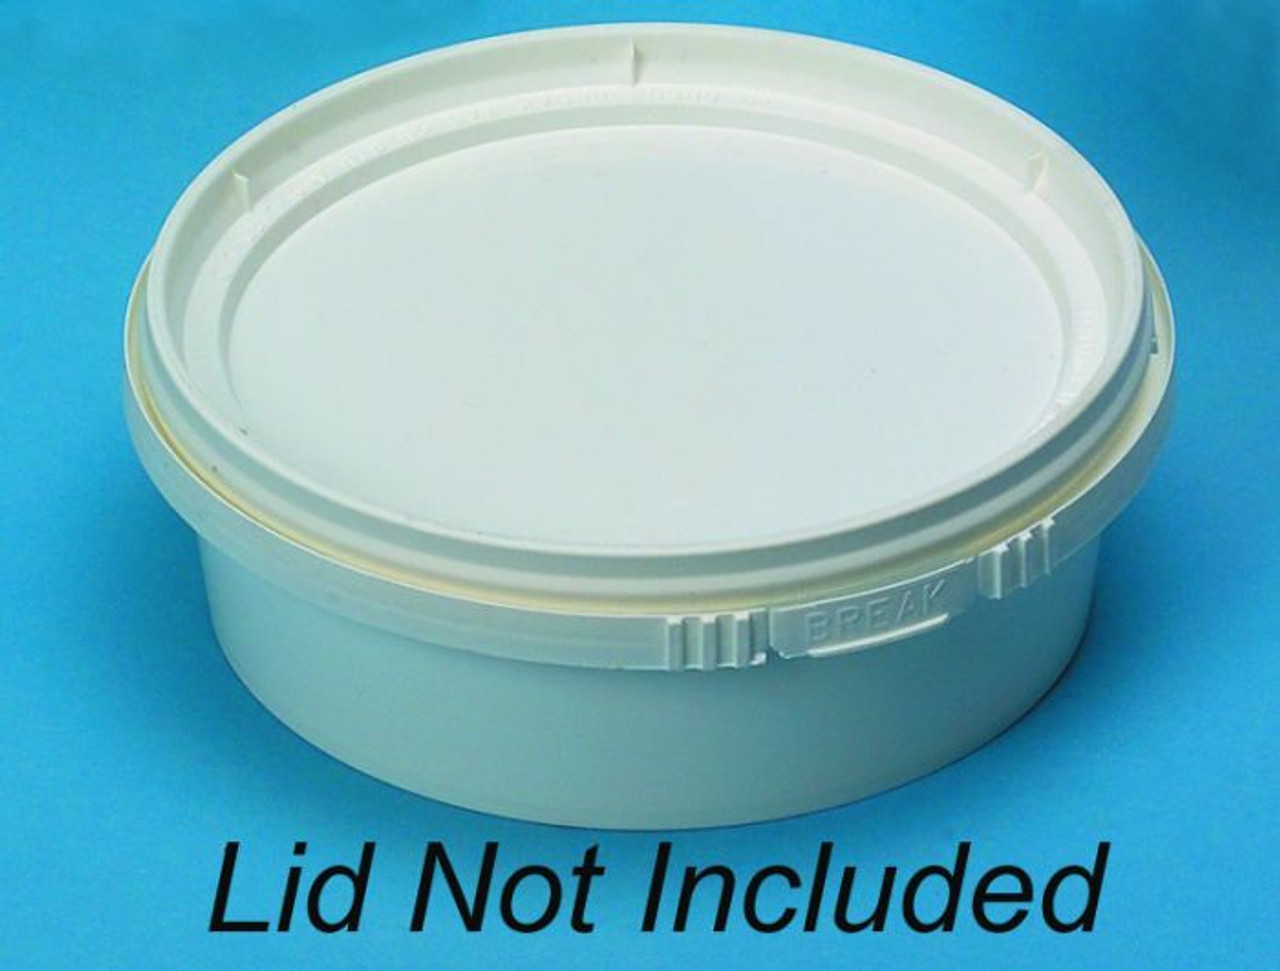 https://cdn11.bigcommerce.com/s-hfqent4fgs/images/stencil/1280x1280/products/2581/4312/8_oz._Round_-_IPL_Retail_Series_Containers_-22314-001-01__59517.1586526845.jpg?c=1